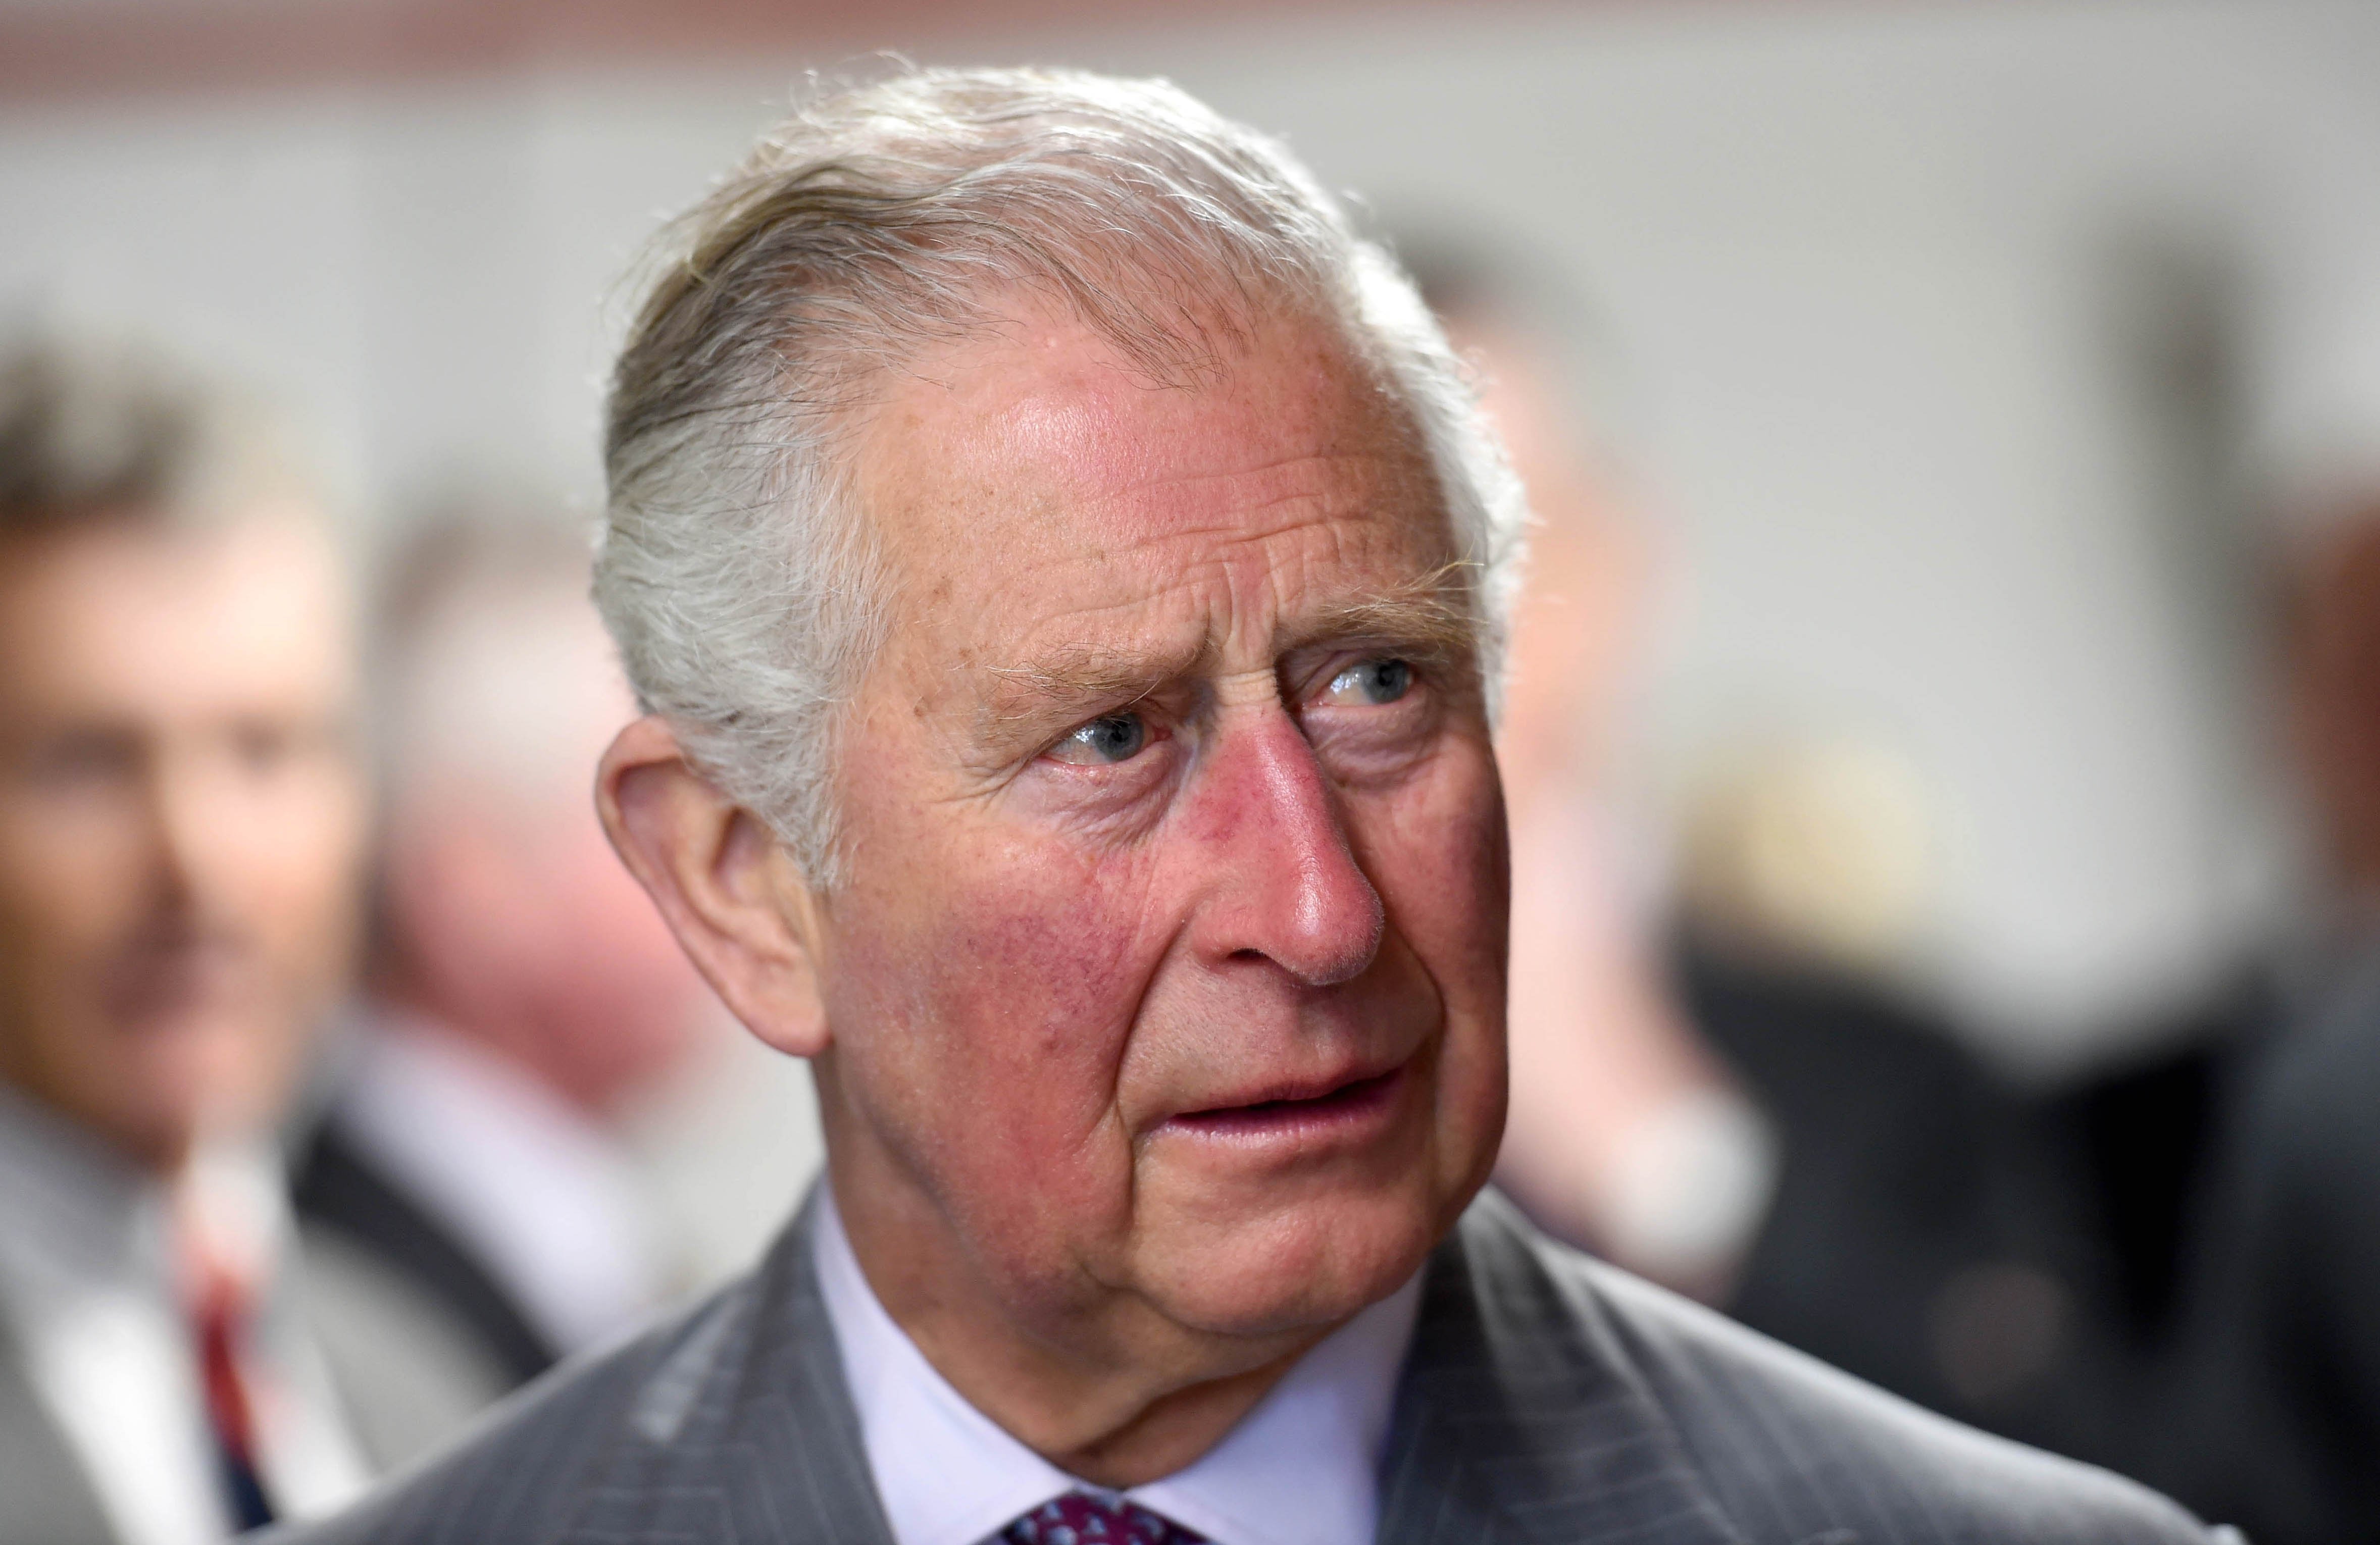 Prince Charles, Prince of Wales makes an official visit to St Austell Brewery on April 05, 2019 | Source: Getty Images.